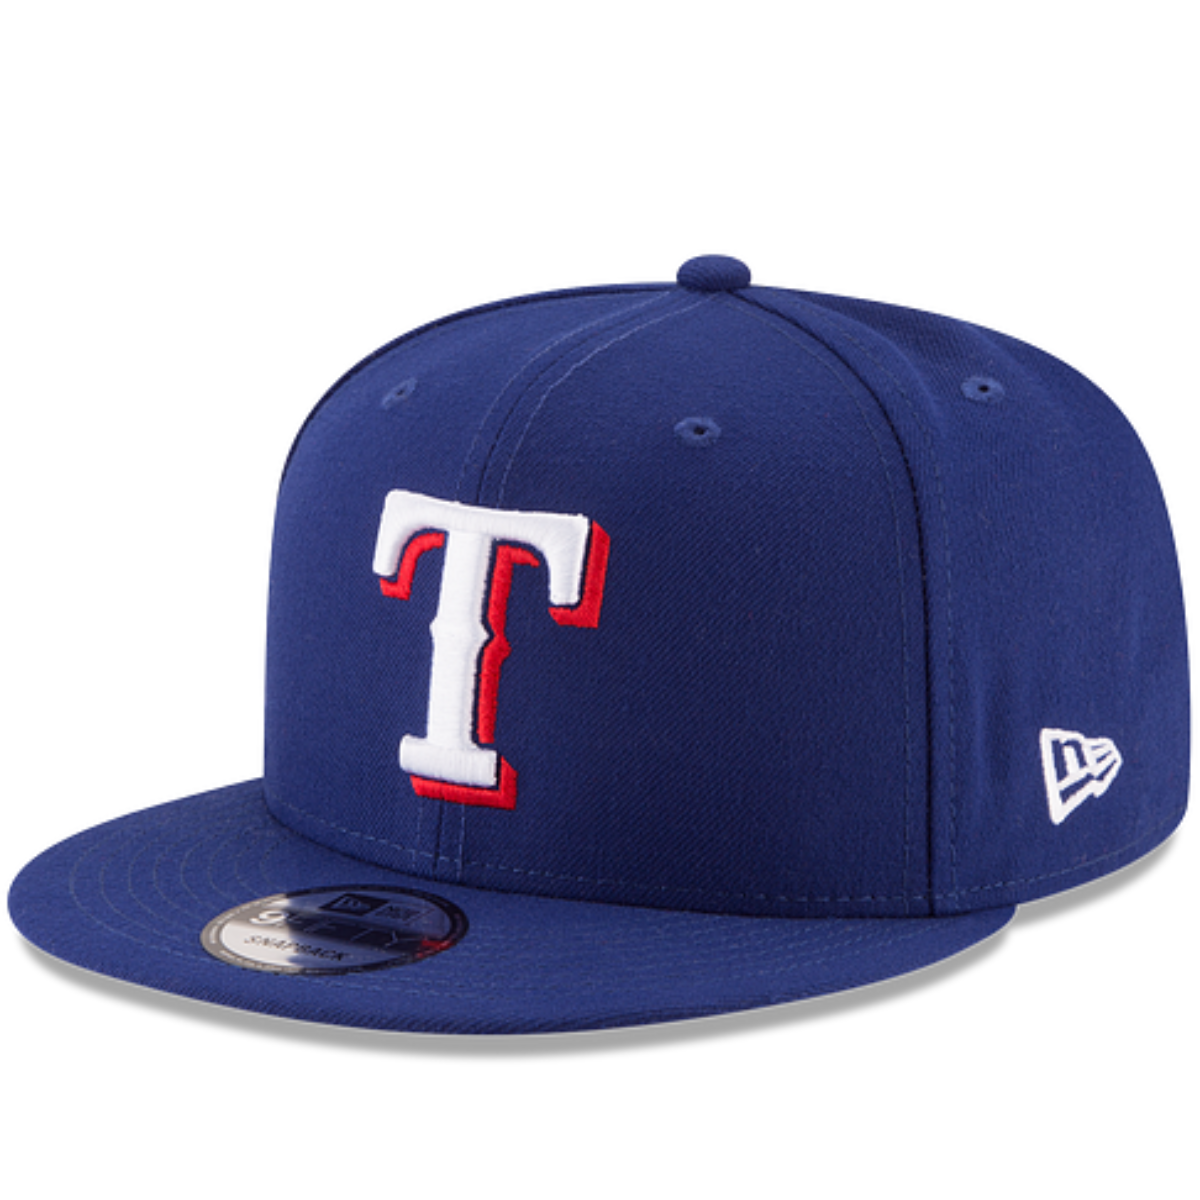 TEXAS RANGERS NEW ERA ON FIELD BASIC COLLECTION SNAPBACK 9FIFTY-BLUE NVSOCCER.COM THE COLISEUM 